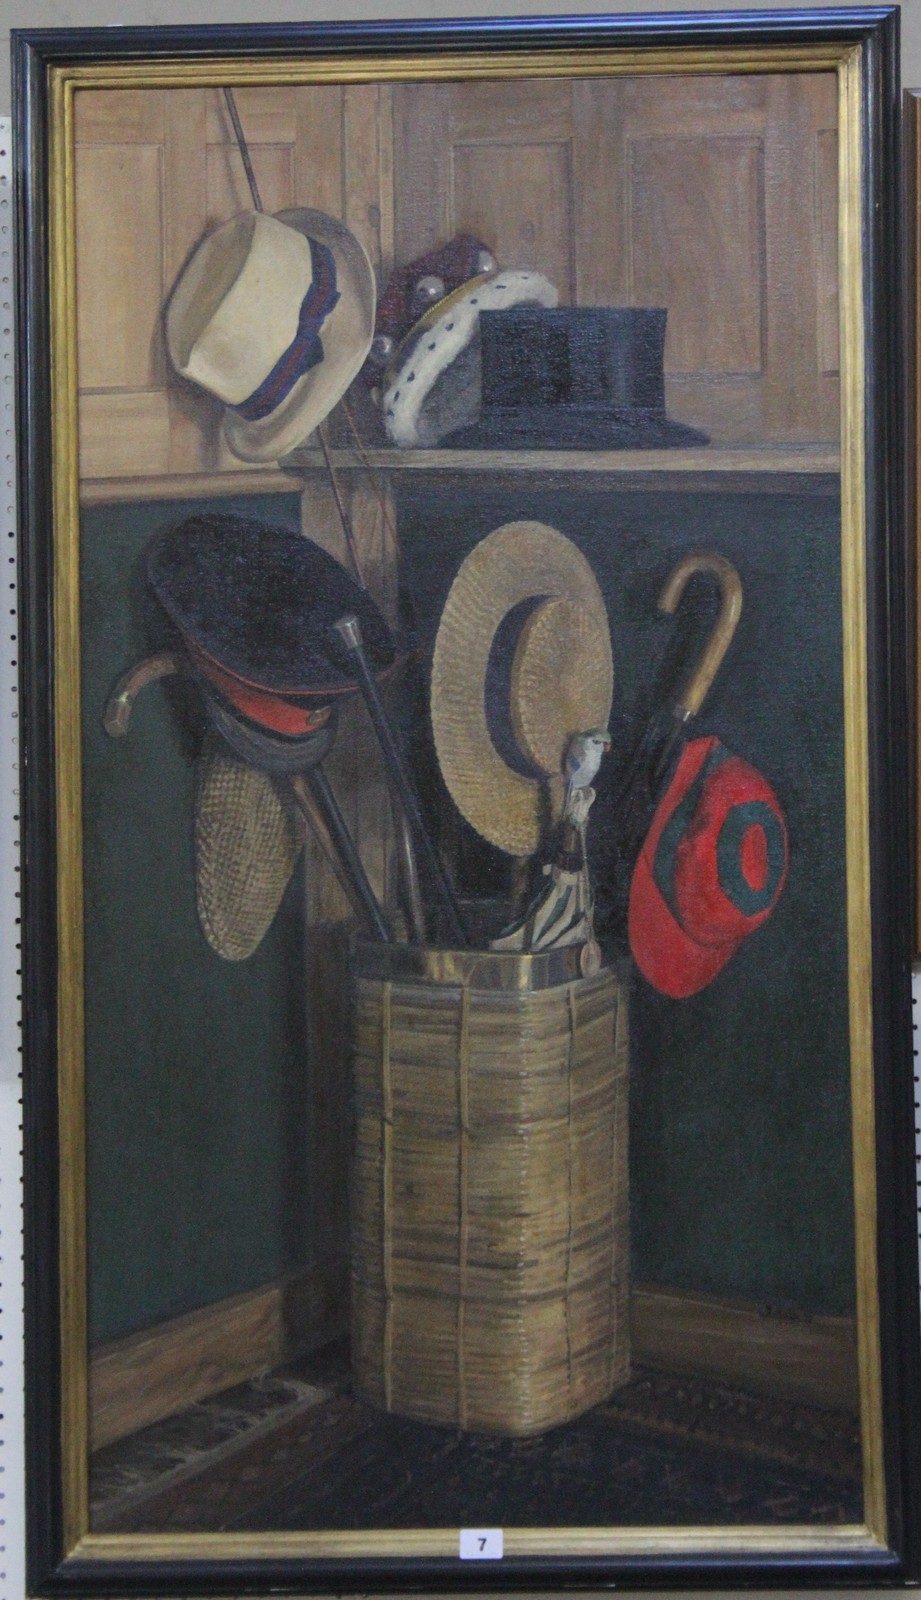 Guy Lester (20th century) The Seven Ages of Anthony - Still life of hats and umbrella stand Oil on